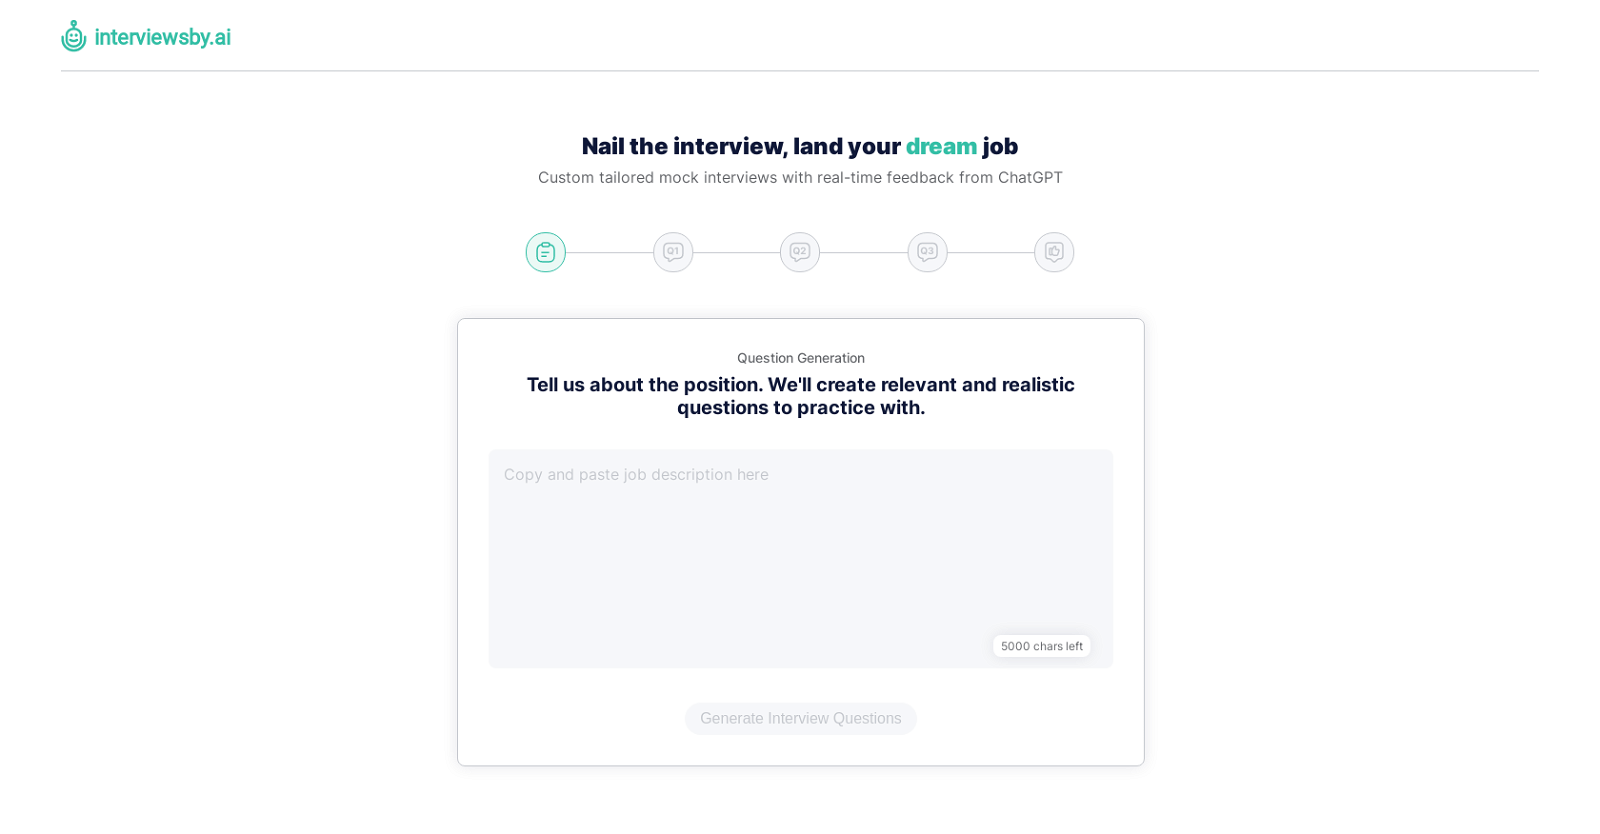 Interviewsby.ai